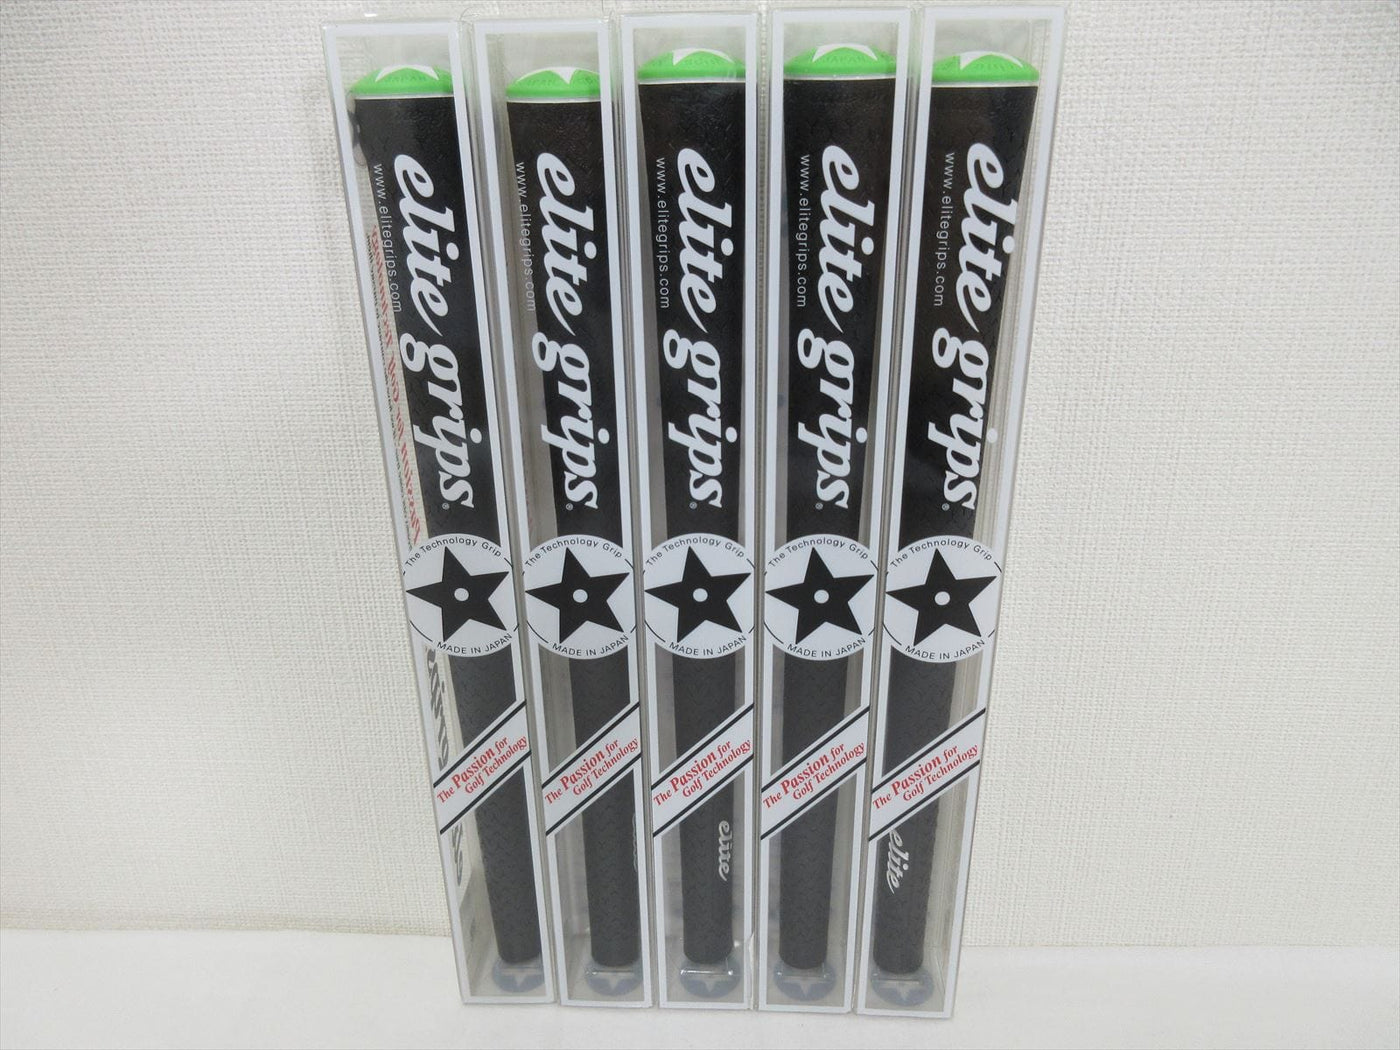 elite grips y360 sv black green 5 20 pieces m58 ribbed